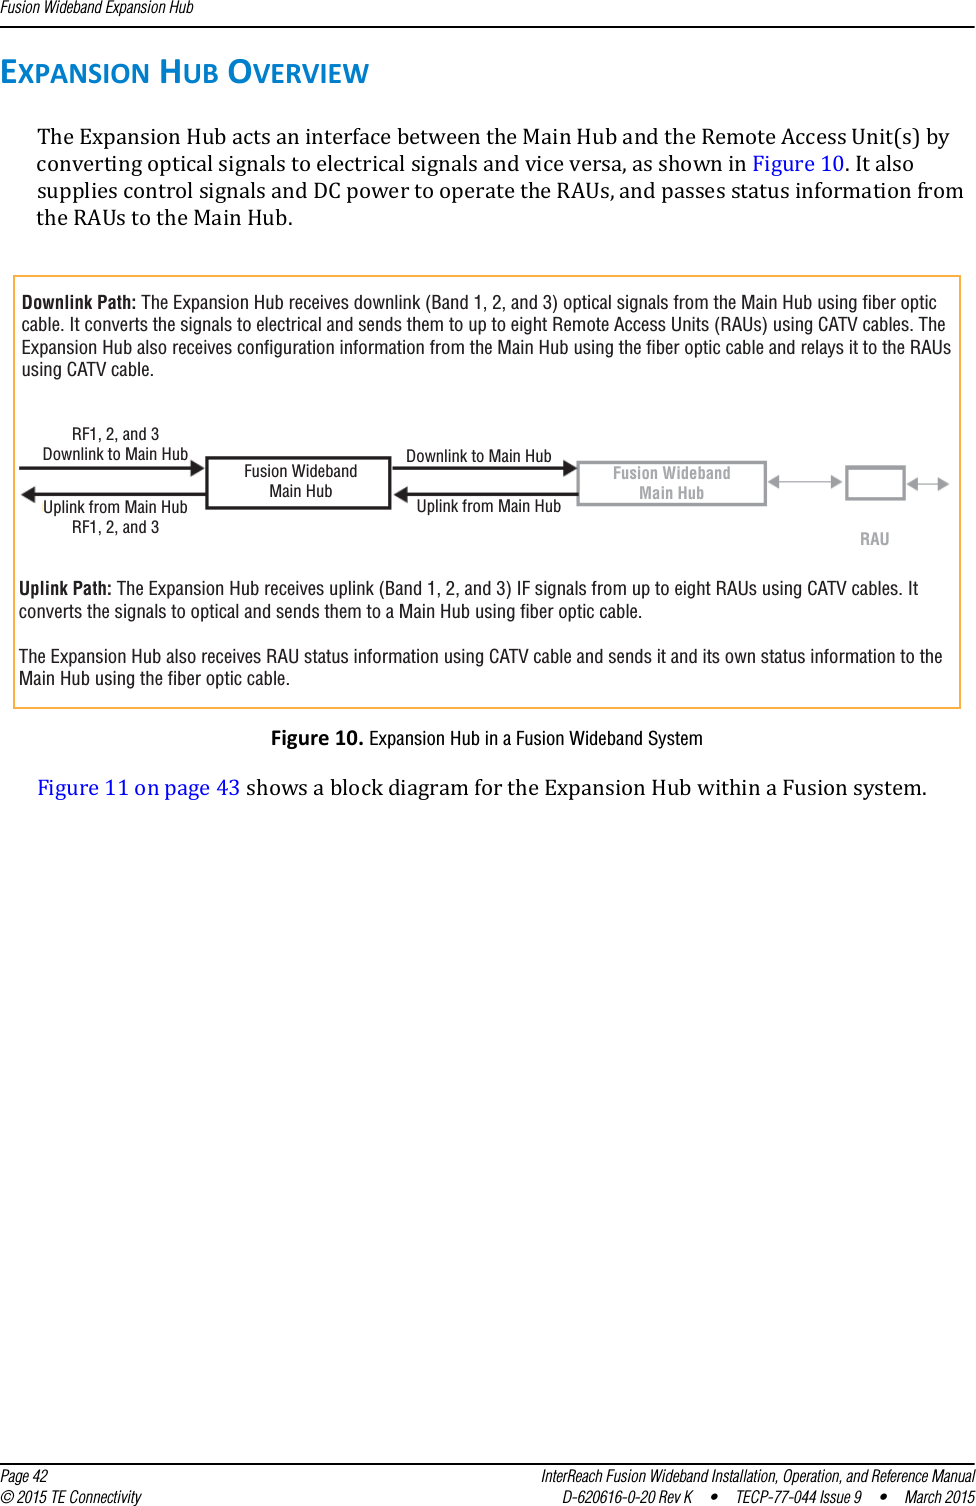 Fusion Wideband Expansion Hub  Page 42 InterReach Fusion Wideband Installation, Operation, and Reference Manual© 2015 TE Connectivity D-620616-0-20 Rev K  •  TECP-77-044 Issue 9  •  March 2015EXPANSION HUB OVERVIEWThe Expansion Hub acts an interface between the Main Hub and the Remote Access Unit(s) by converting optical signals to electrical signals and vice versa, as shown in Figure 10. It also supplies control signals and DC power to operate the RAUs, and passes status information from the RAUs to the Main Hub.Figure 10. Expansion Hub in a Fusion Wideband SystemFigure 11 on page 43 shows a block diagram for the Expansion Hub within a Fusion system.Downlink Path: The Expansion Hub receives downlink (Band 1, 2, and 3) optical signals from the Main Hub using fiber optic cable. It converts the signals to electrical and sends them to up to eight Remote Access Units (RAUs) using CATV cables. The Expansion Hub also receives configuration information from the Main Hub using the fiber optic cable and relays it to the RAUs using CATV cable.Uplink Path: The Expansion Hub receives uplink (Band 1, 2, and 3) IF signals from up to eight RAUs using CATV cables. It converts the signals to optical and sends them to a Main Hub using fiber optic cable.The Expansion Hub also receives RAU status information using CATV cable and sends it and its own status information to the Main Hub using the fiber optic cable.RF1, 2, and 3Downlink to Main HubUplink from Main HubRF1, 2, and 3Downlink to Main HubUplink from Main HubFusion WidebandMain HubFusion WidebandMain HubRAU